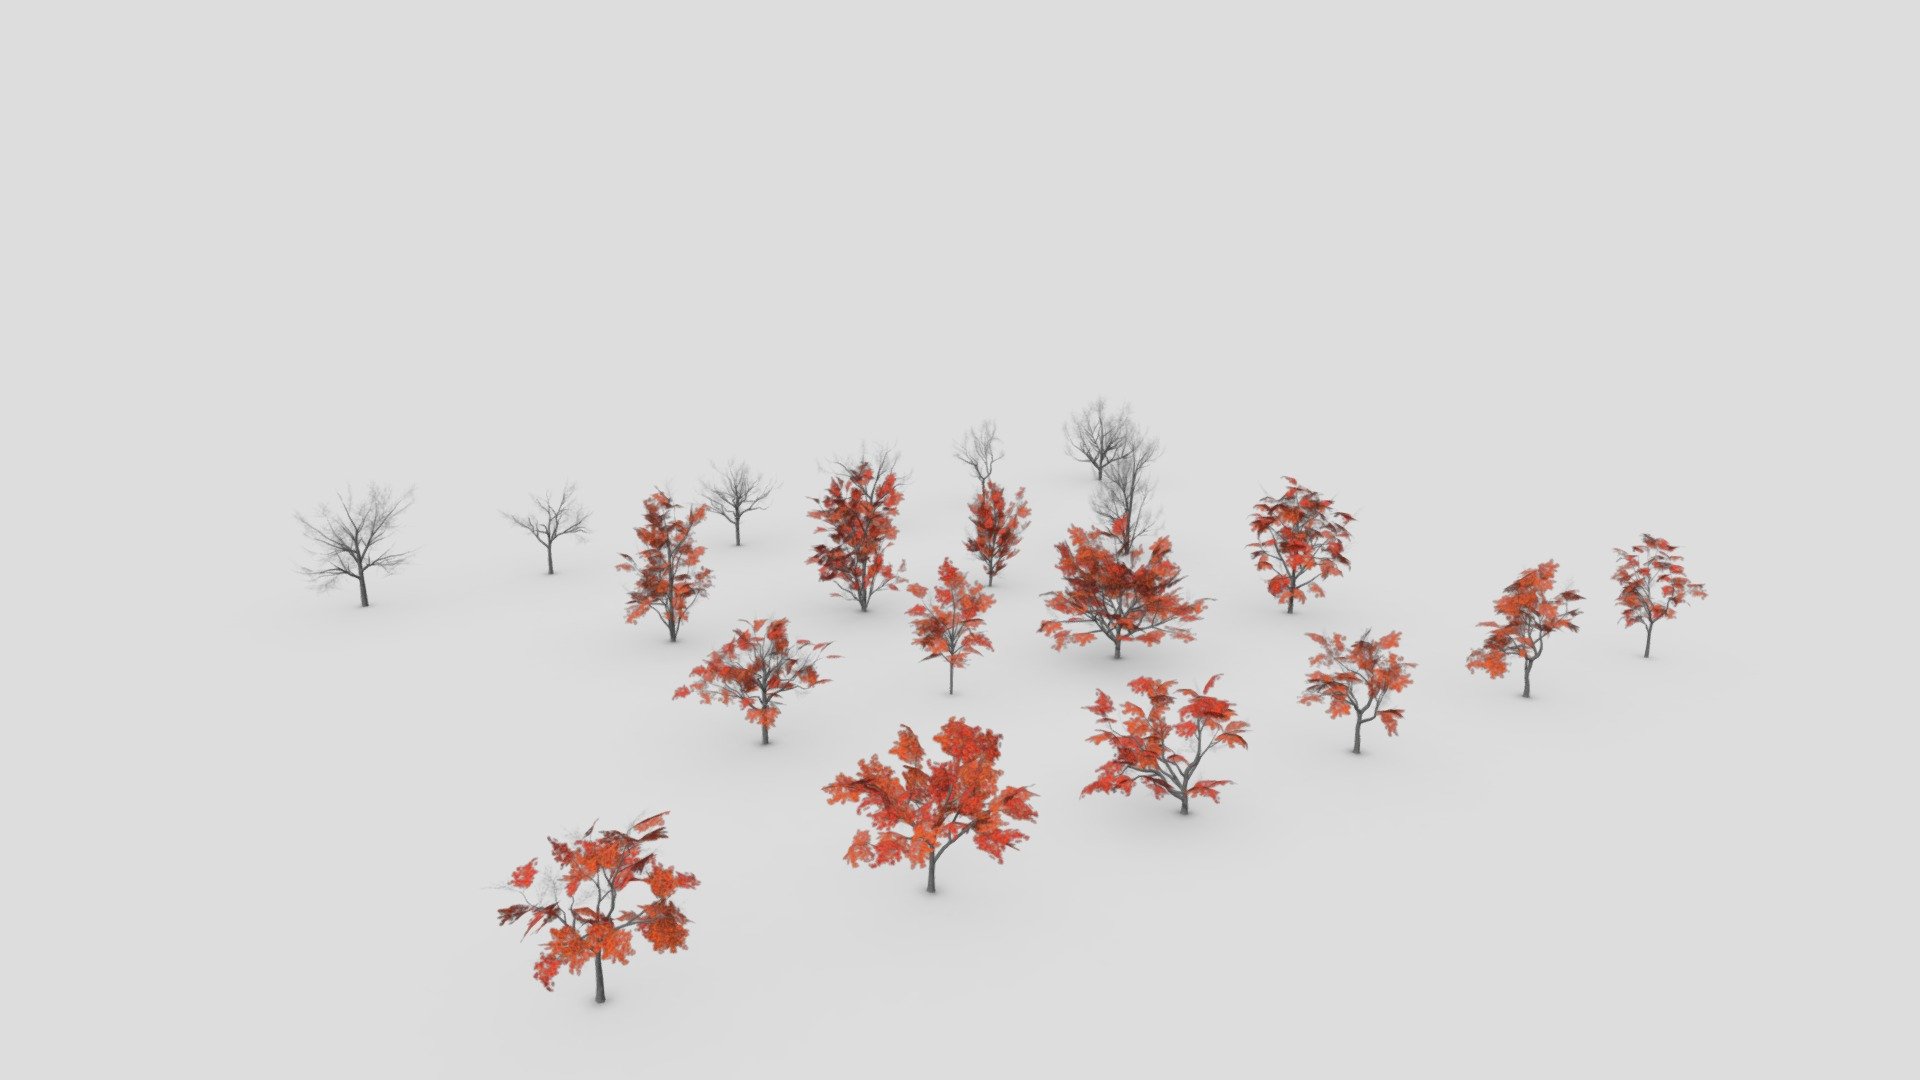 Here we provide about 20 styles of Red maple tree in fall season. there are low poly.
 Youtube: https://youtu.be/hc54kB4zicw                                  

Follow US: https://www.instagram.com/asma3d.official

Acer rubrum, the red maple, also known as swamp, water or soft maple, is one of the most common and widespread deciduous trees of eastern and central North America. The U.S. Forest service recognizes it as the most abundant native tree in eastern North America 3d model